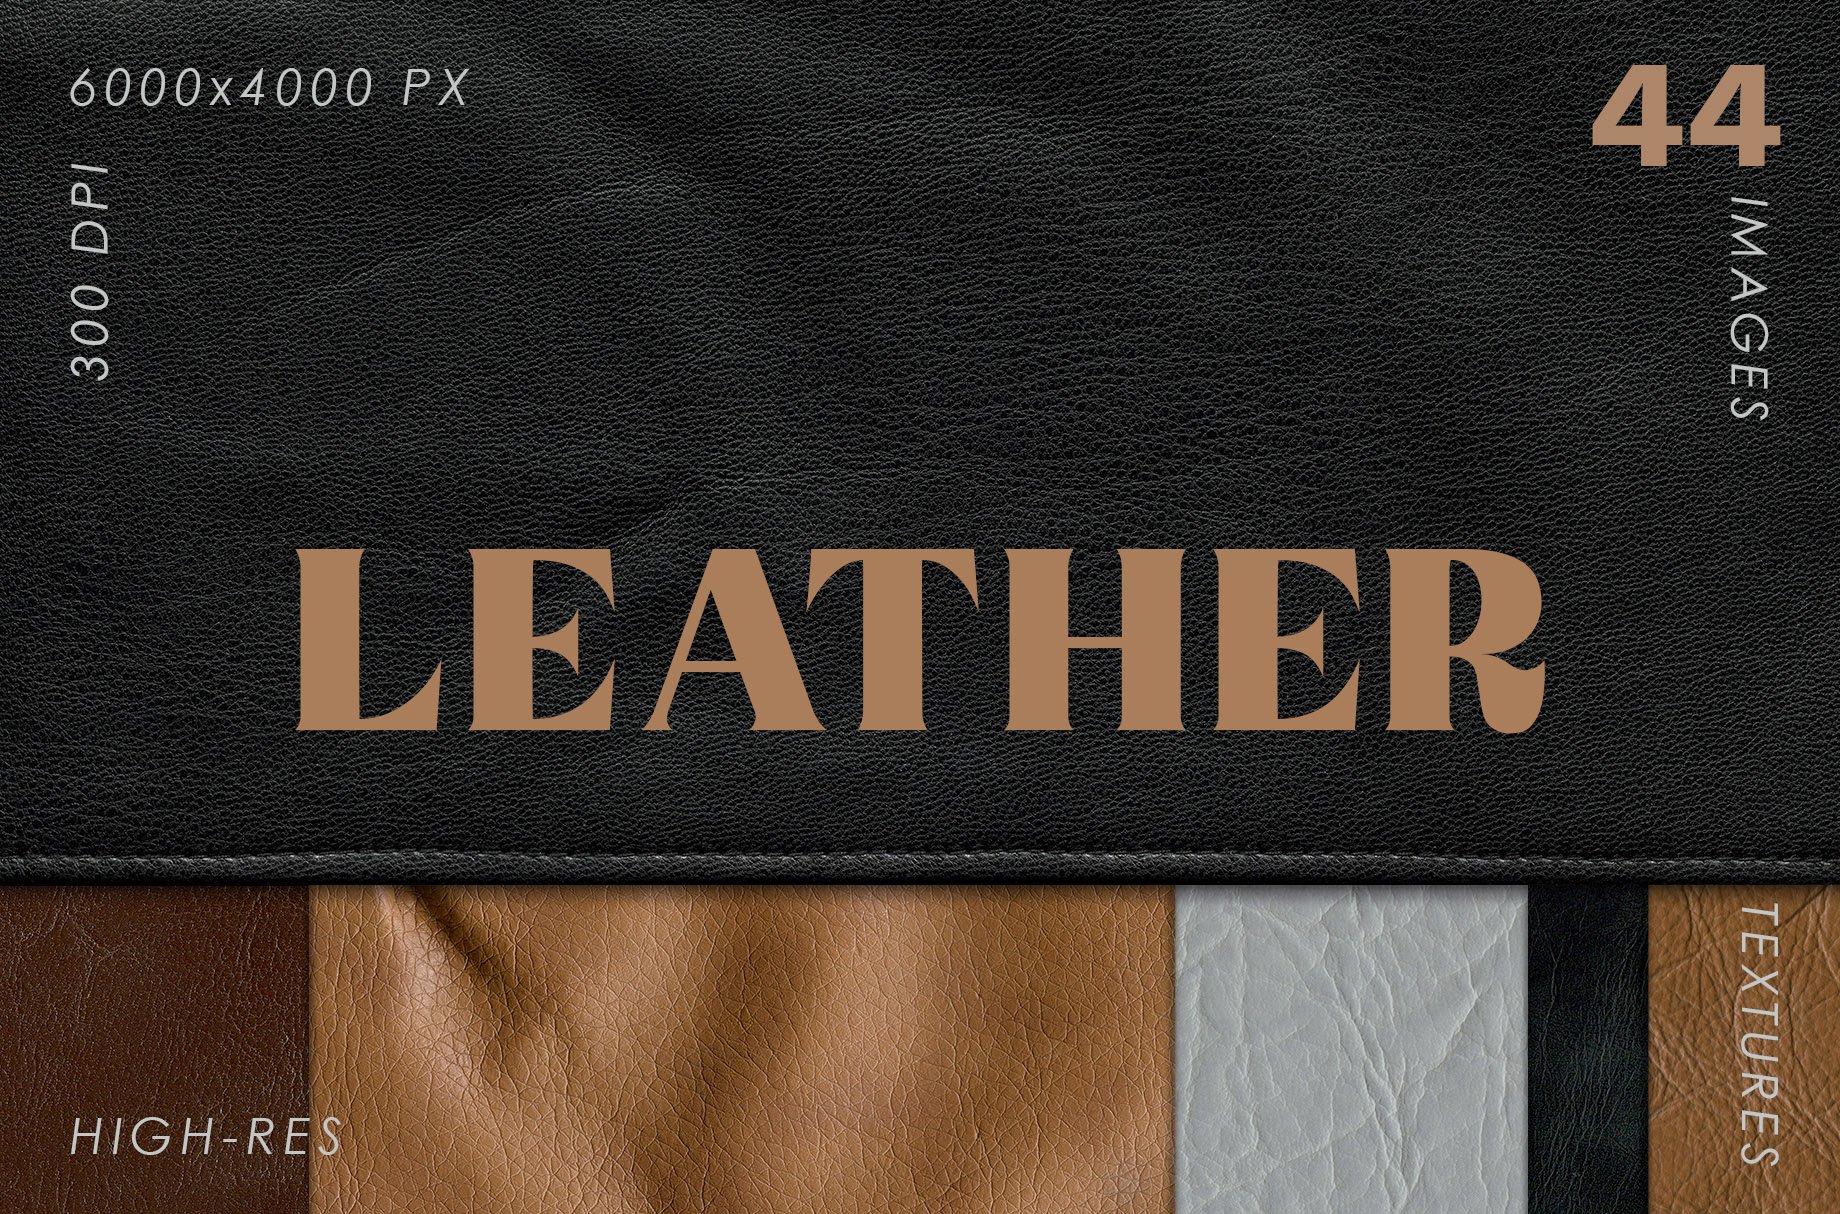 Natural & Vegan Leather Textures cover image.